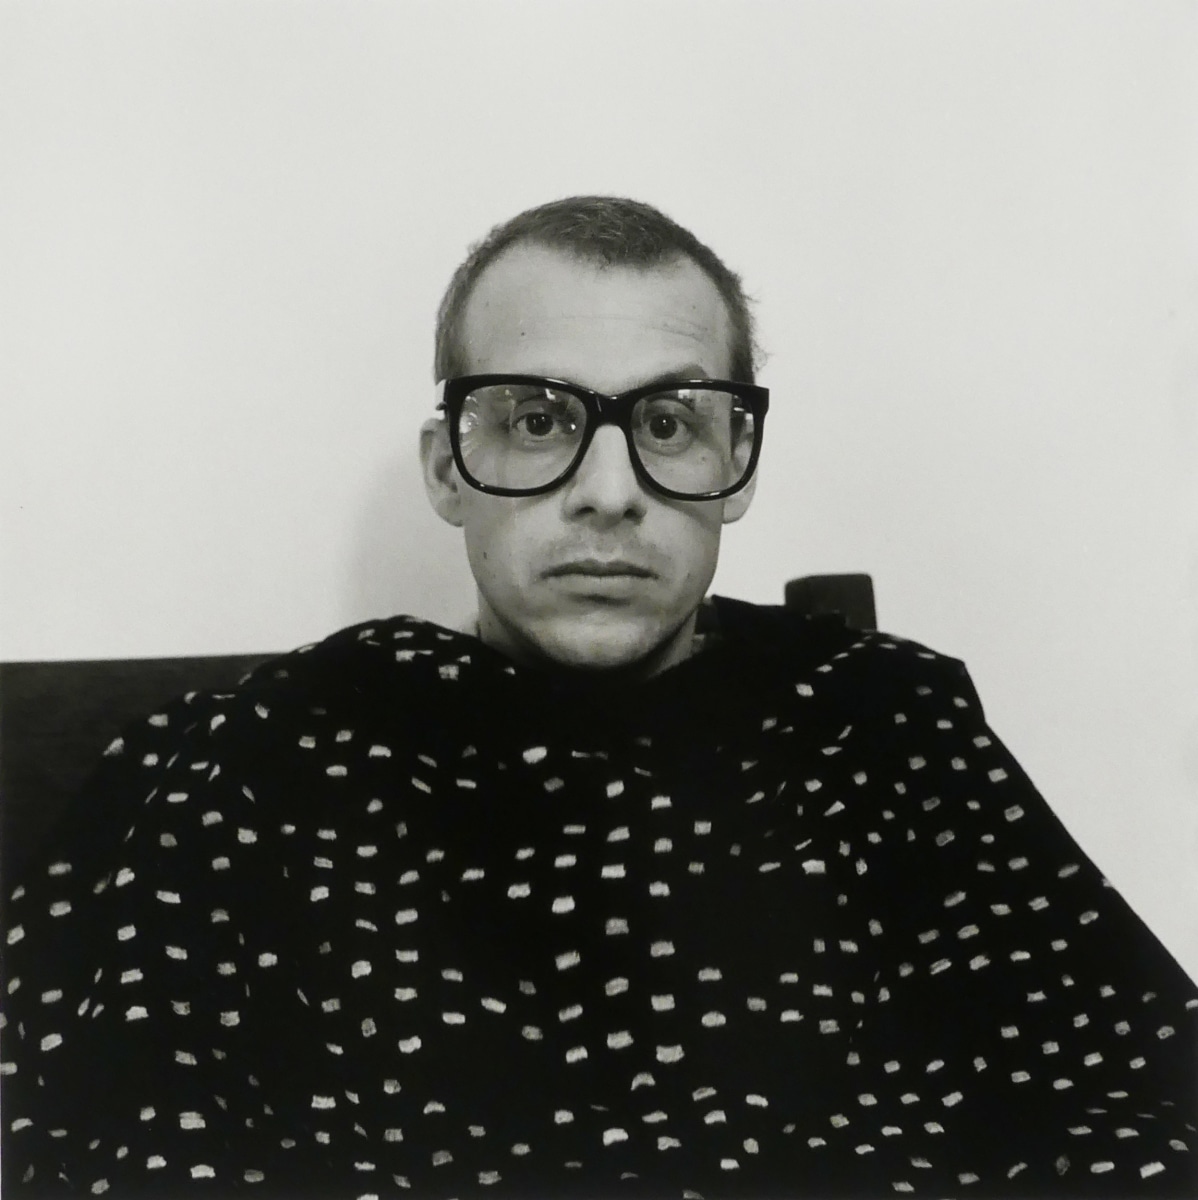 Man with glasses by Robert Giard